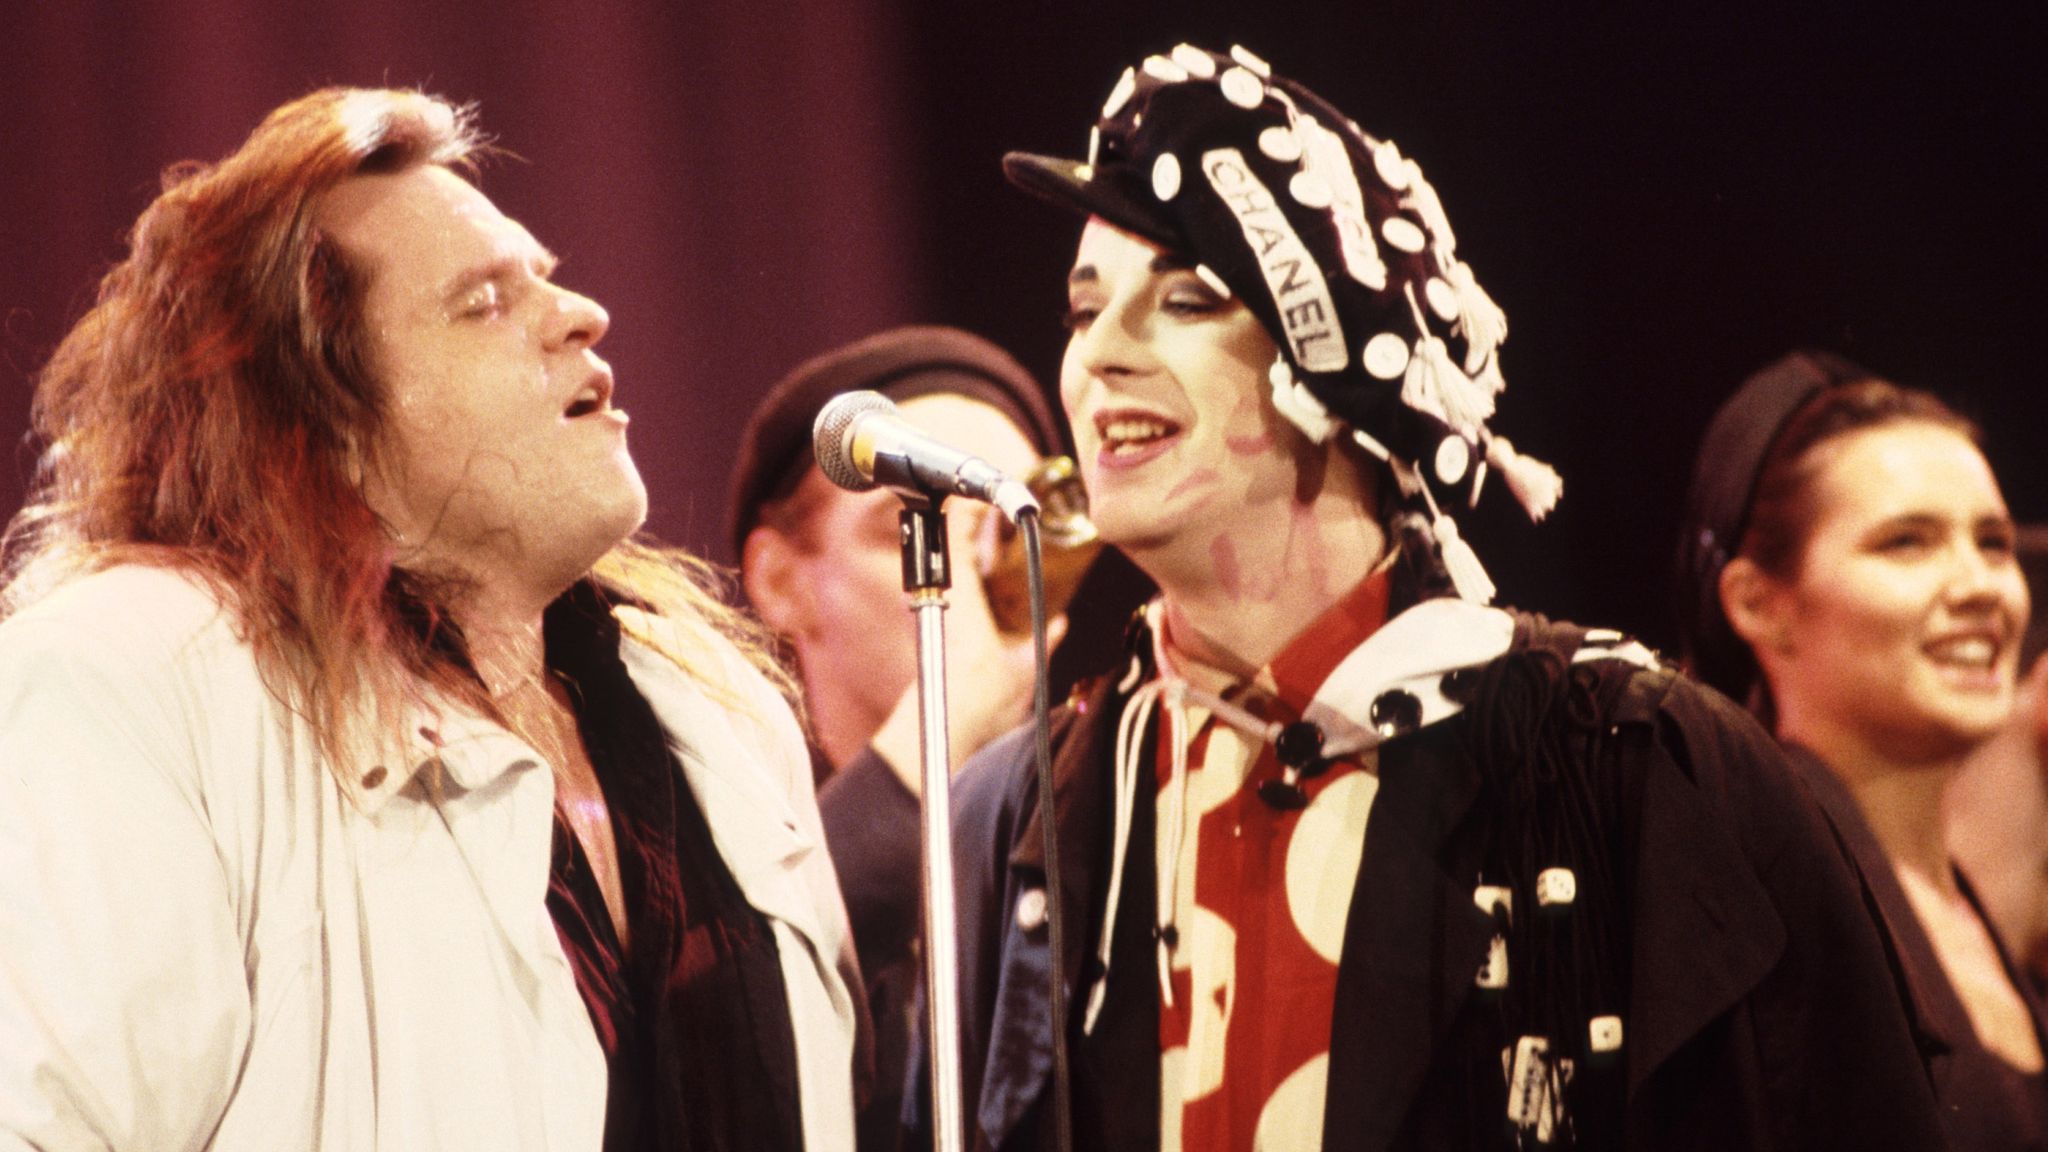 Pic; Andre Csillag/Shutterstock Meat Loaf and Boy George at the Aids Benefit show, Wembley. London - Apr 1987 Apr 1987